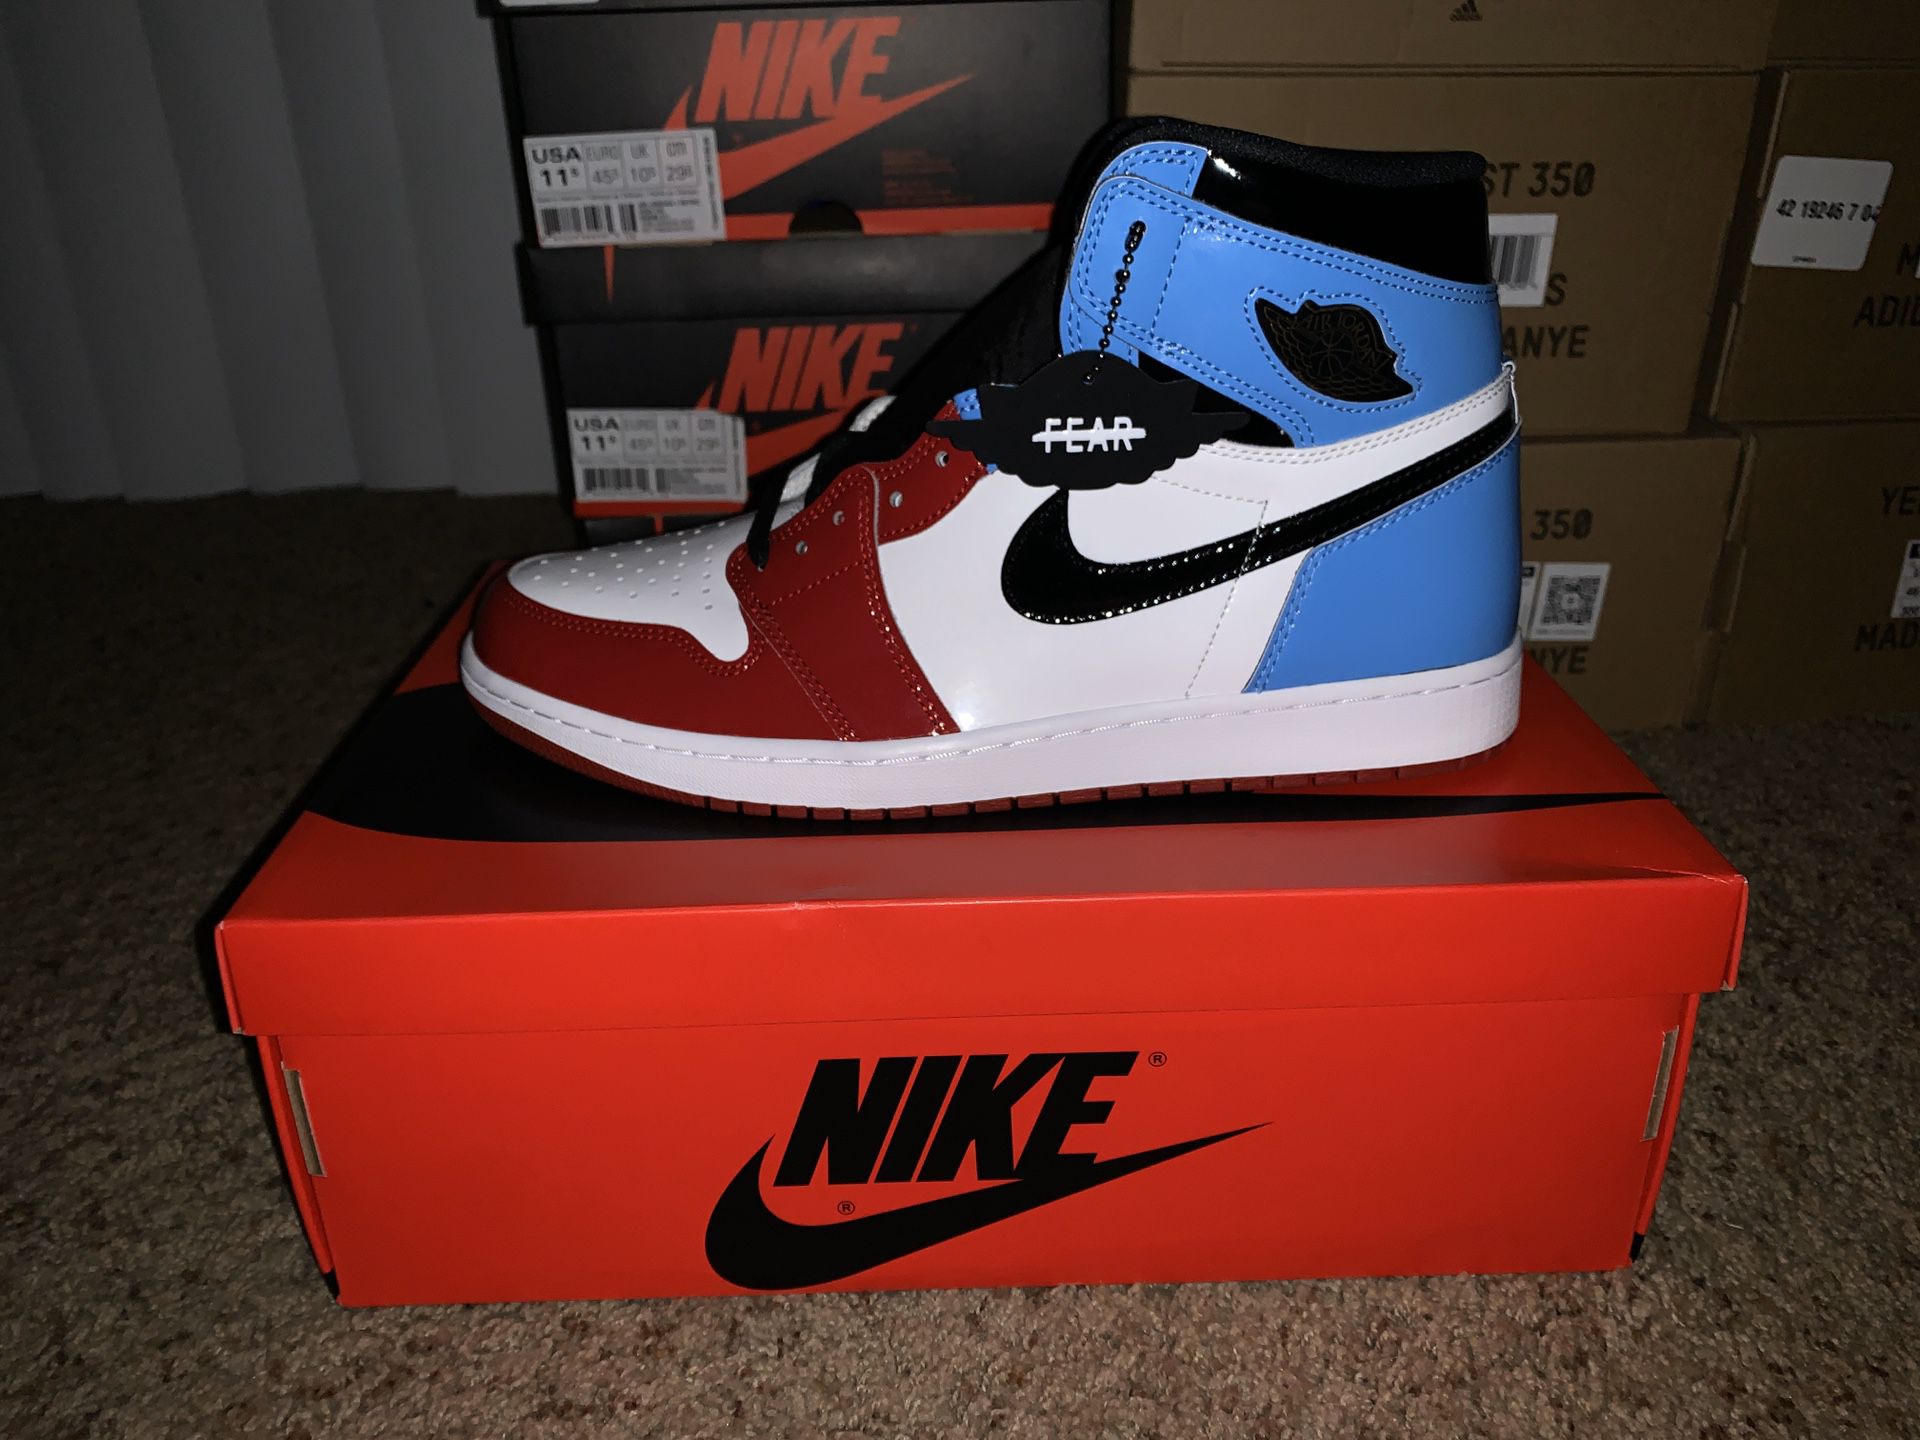 Air Jordan 1 Fearless SBB 3.0 and Hyperspace Size 12